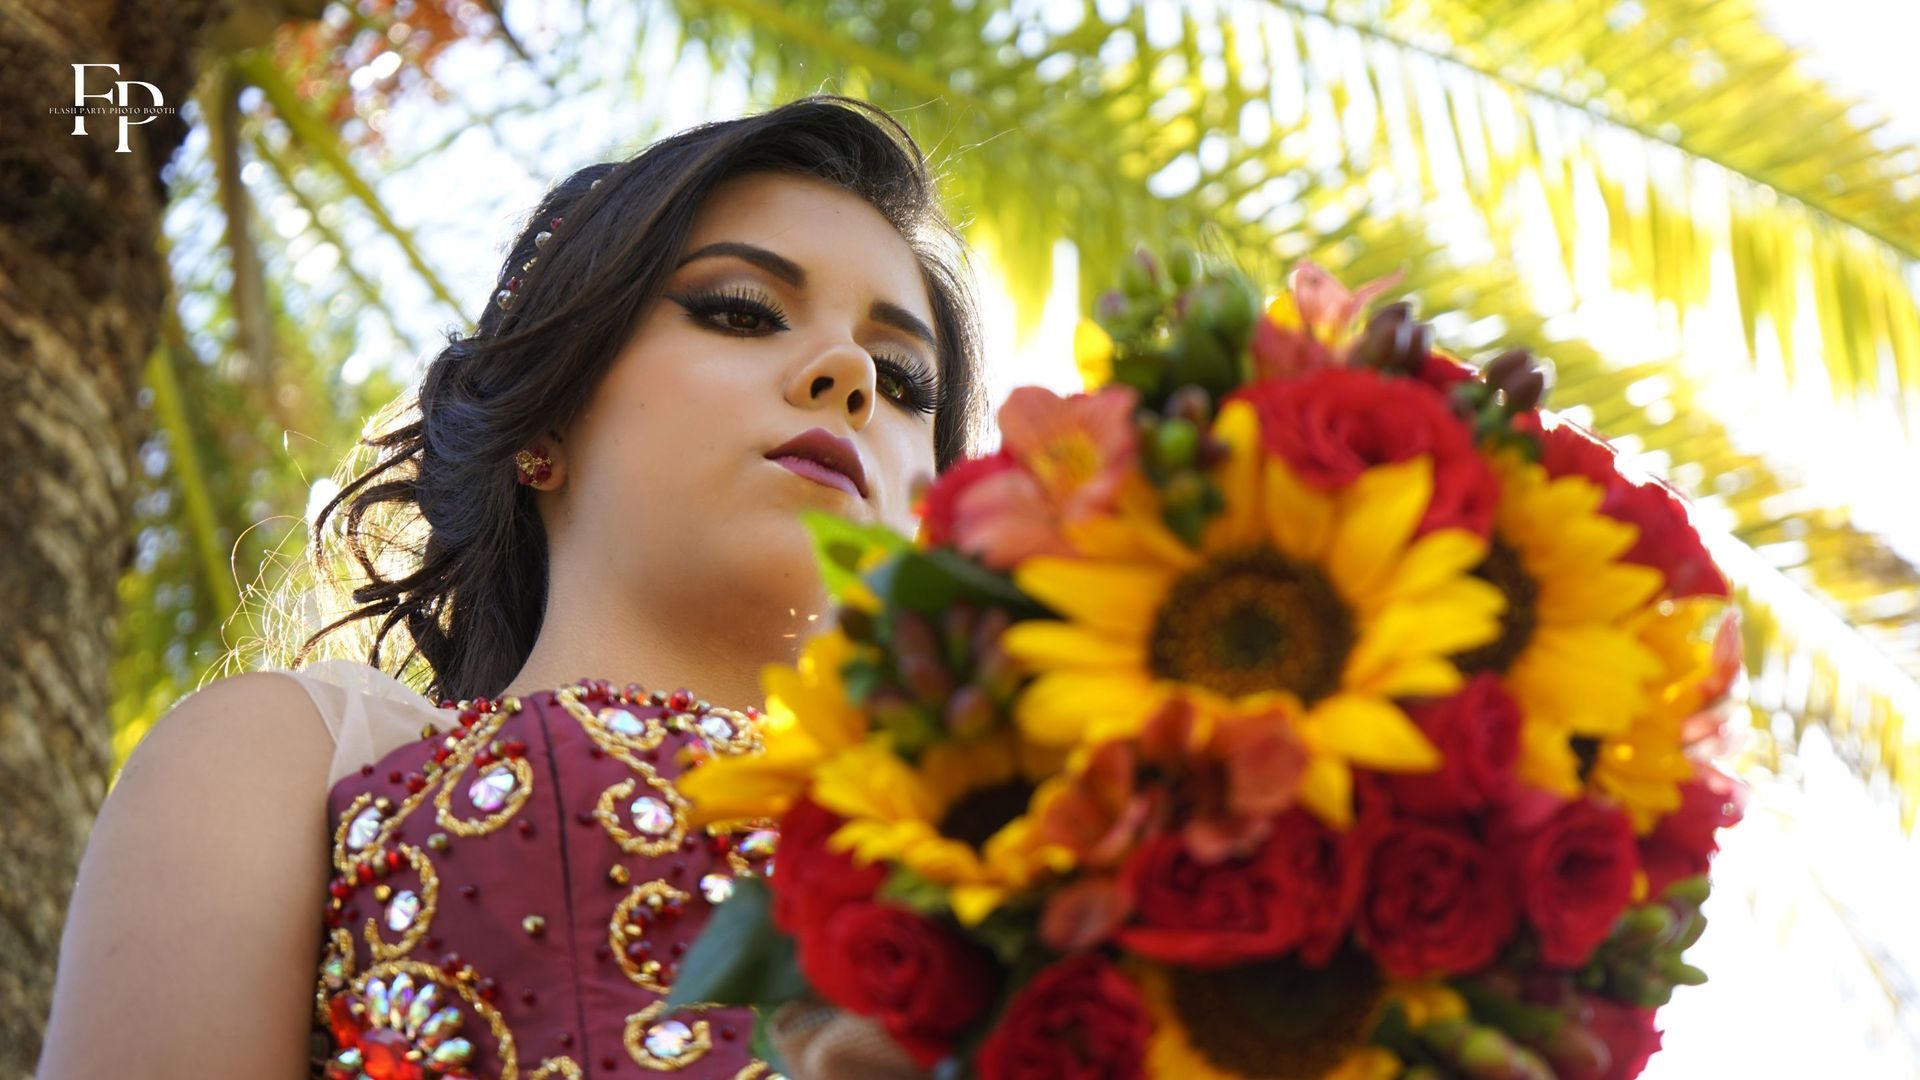 Quinceañera celebrant glowing with joy in South Austin.